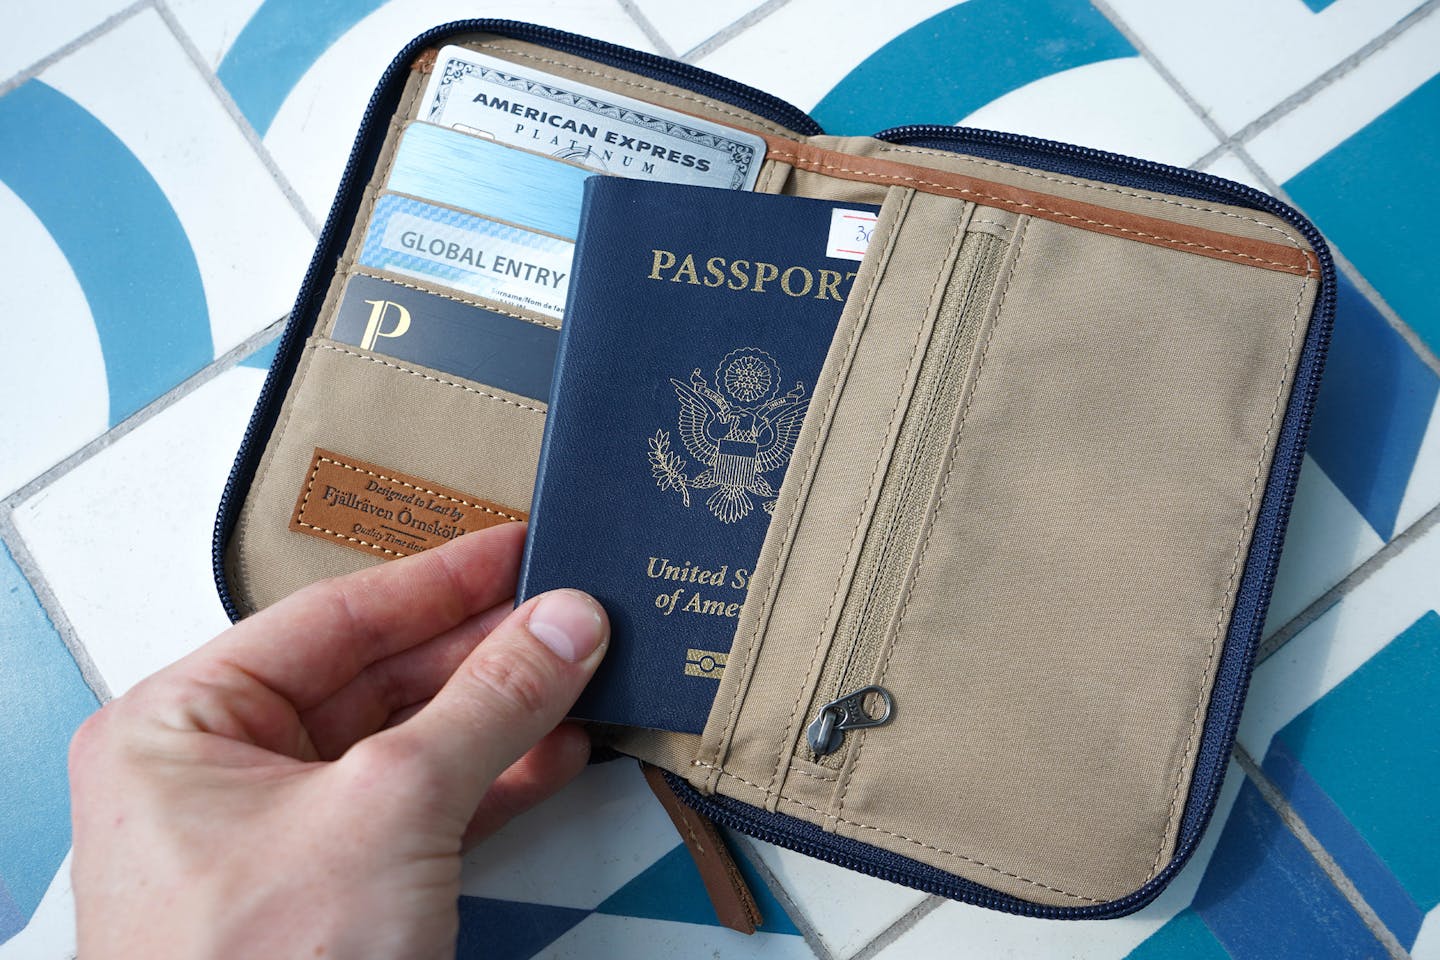 first direct travel wallet